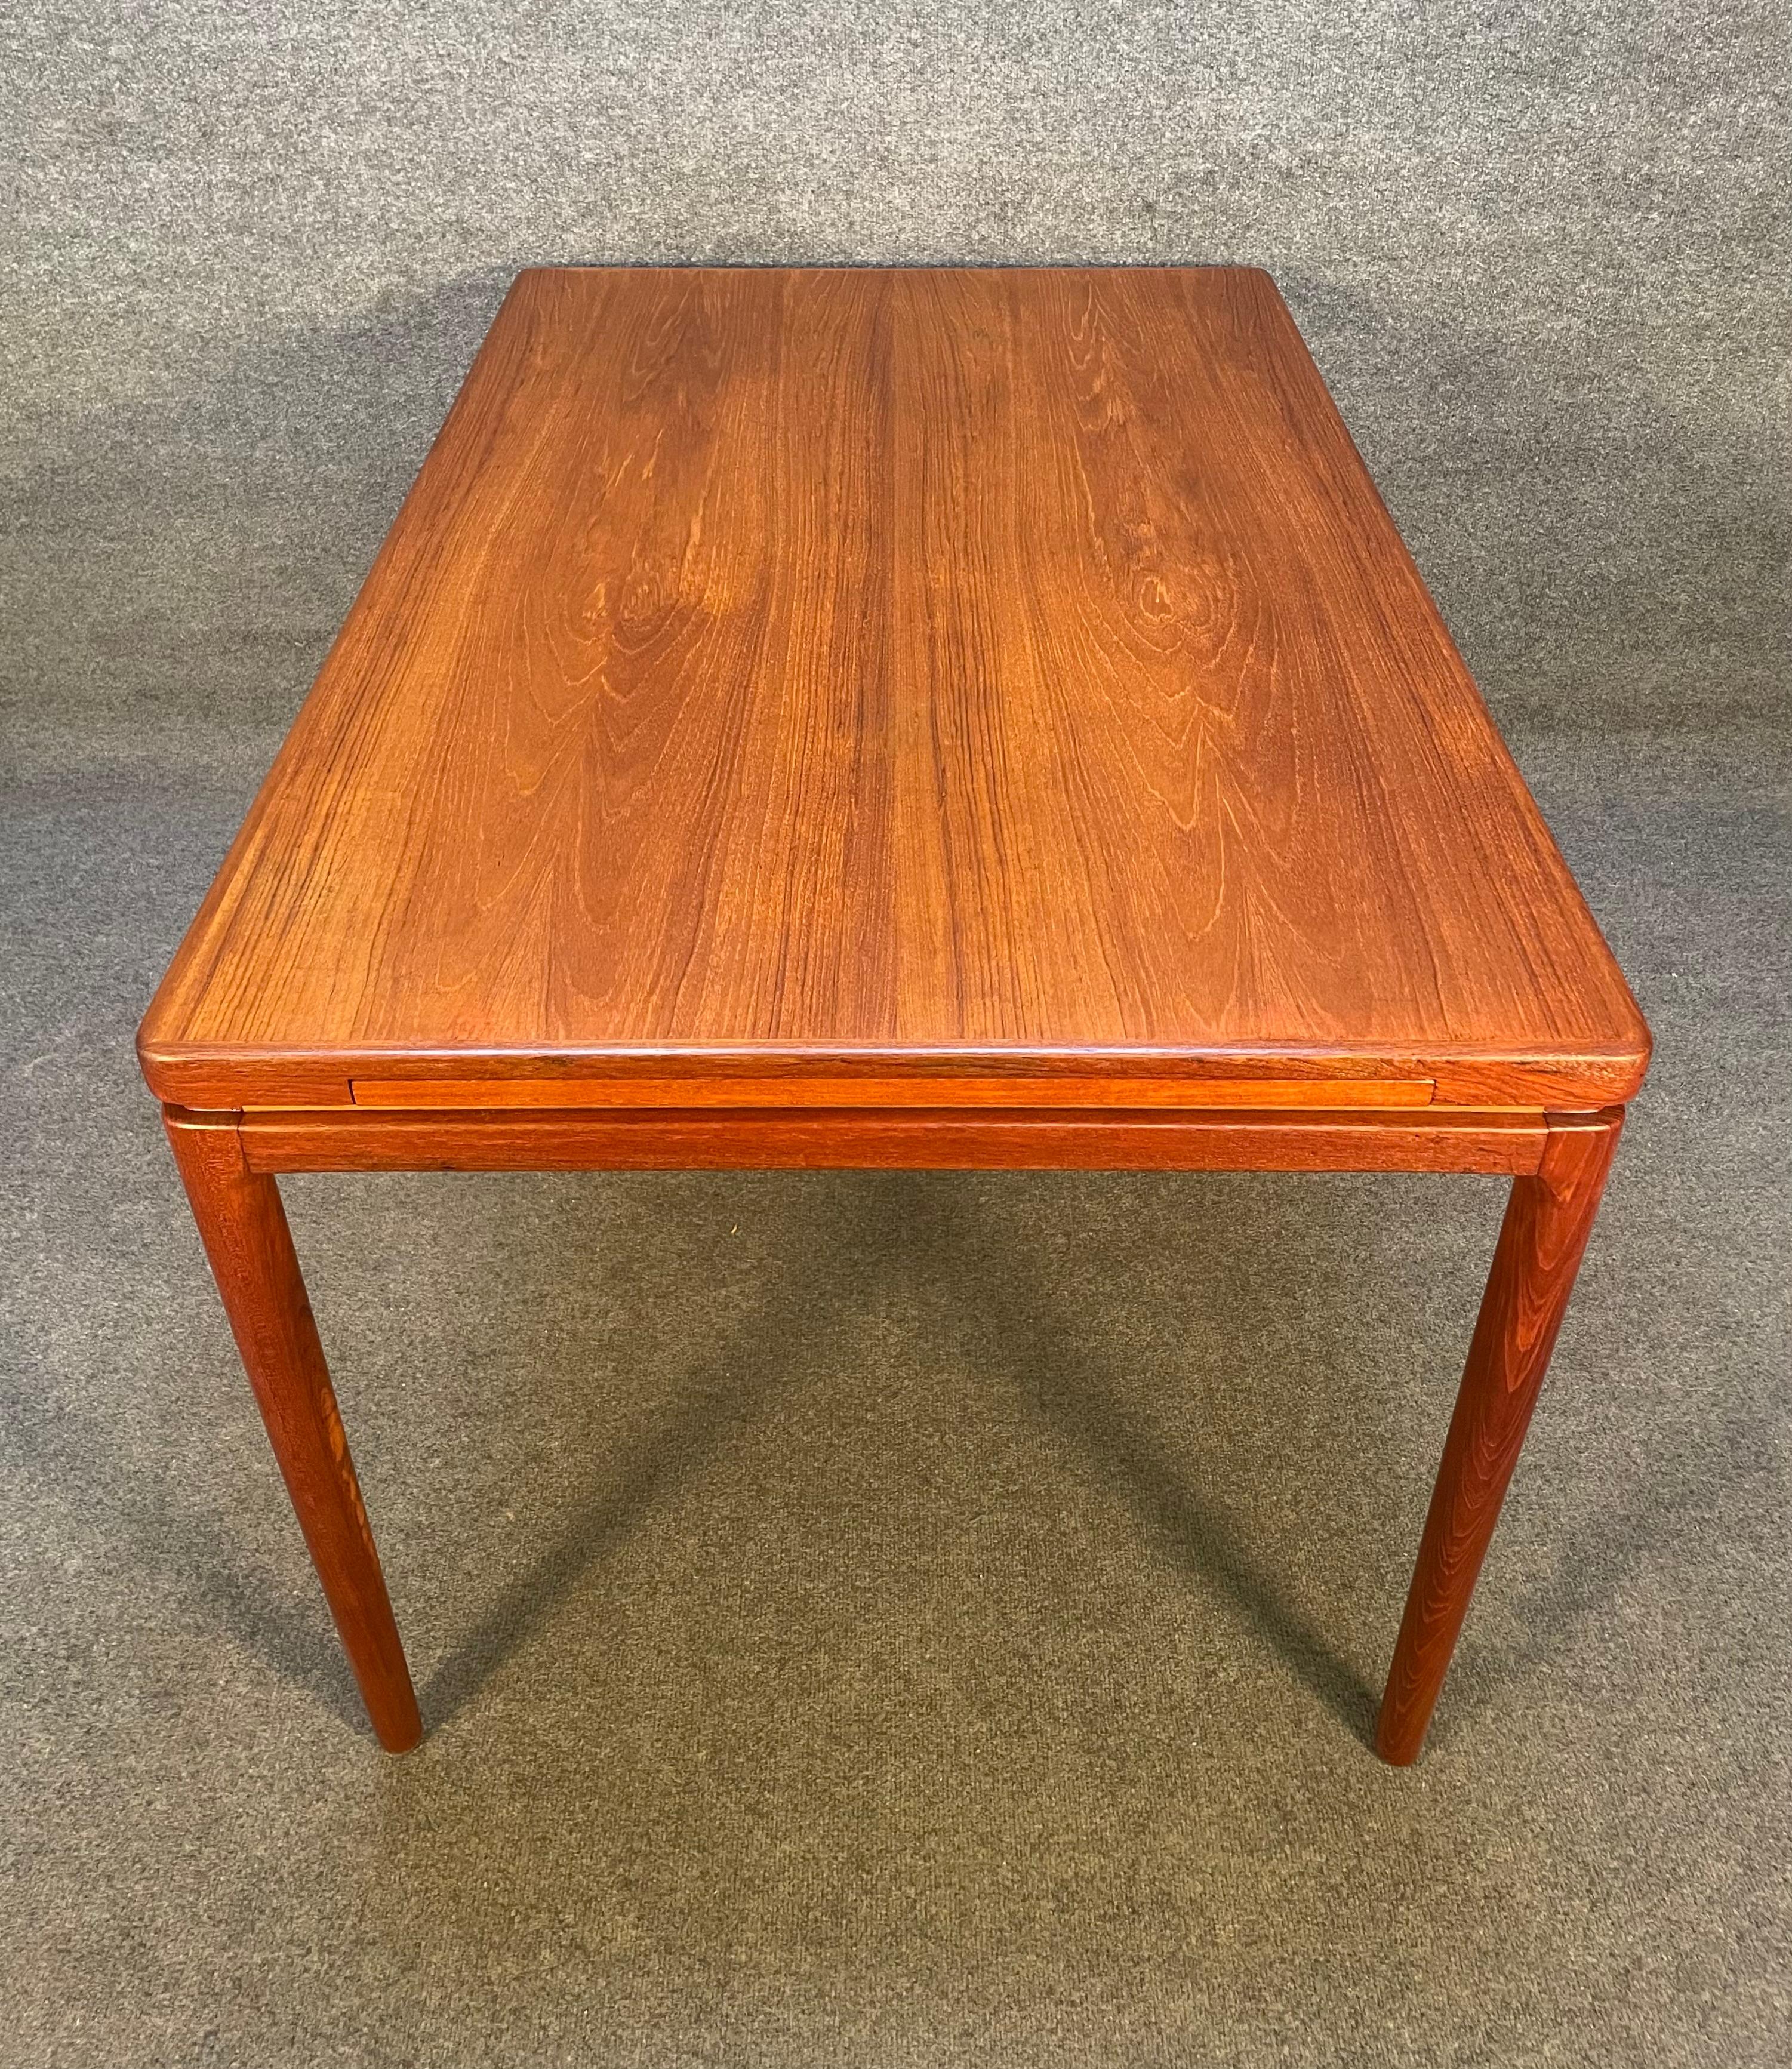 Here is a beautiful Scandinavian Modern dining table in teak wood designed by Johannes Andersen and manufactured by Christian Linnenberg Mobelfabrik in Denmark in the 1960s.
This lovely table, recently imported from Europe to California before its